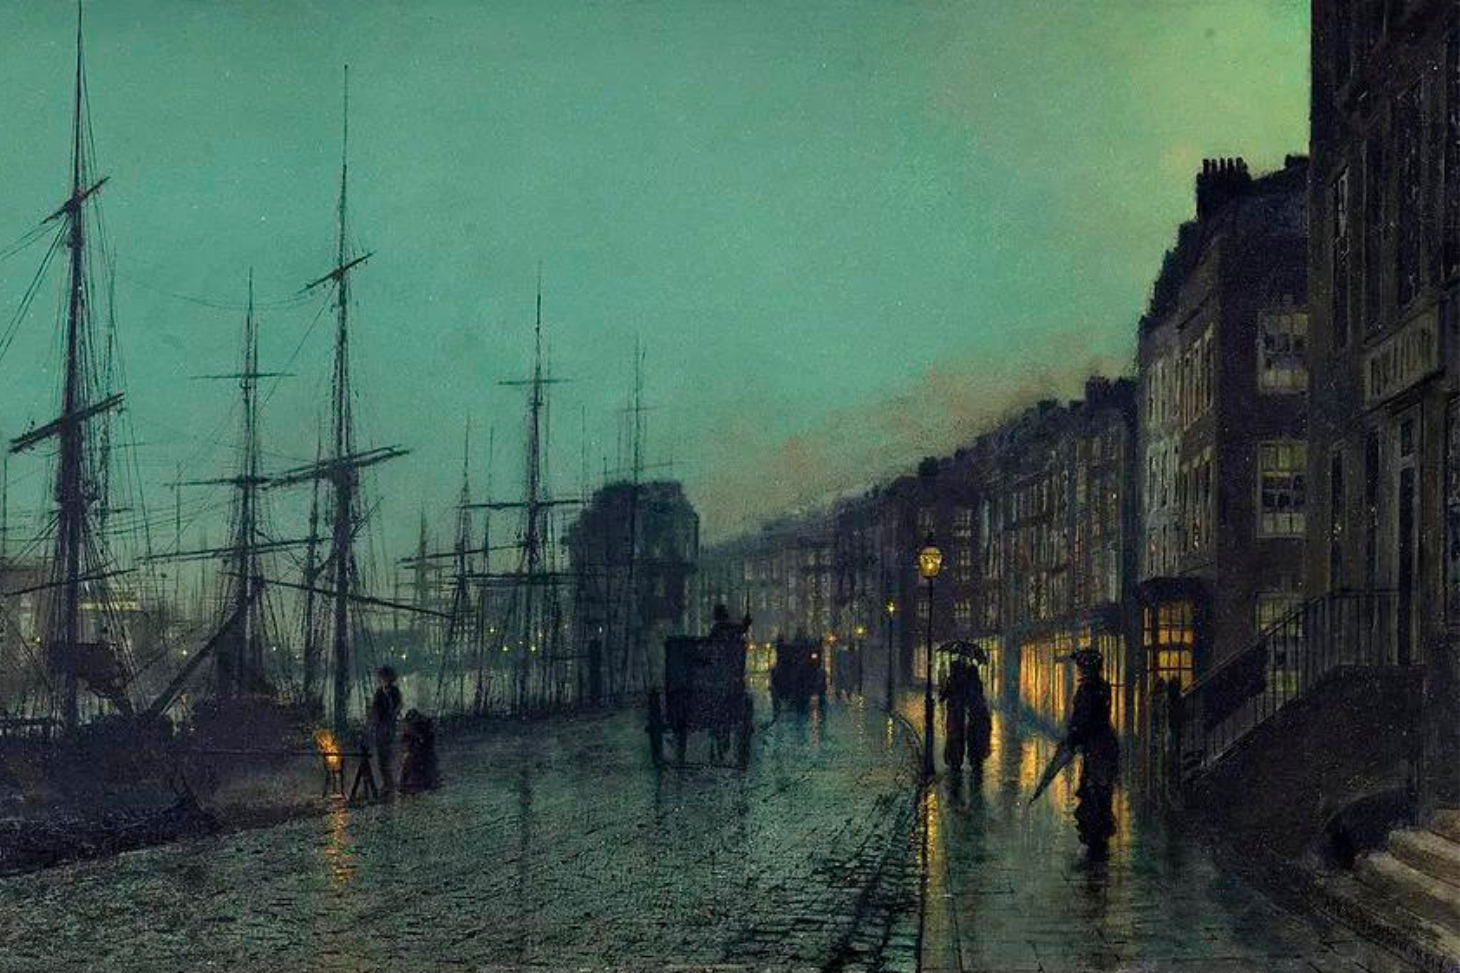 Glasgow’s harbour on the River Clyde was an artery of the industrial revolution. Museo Thyssen-Bornemisza, Madrid